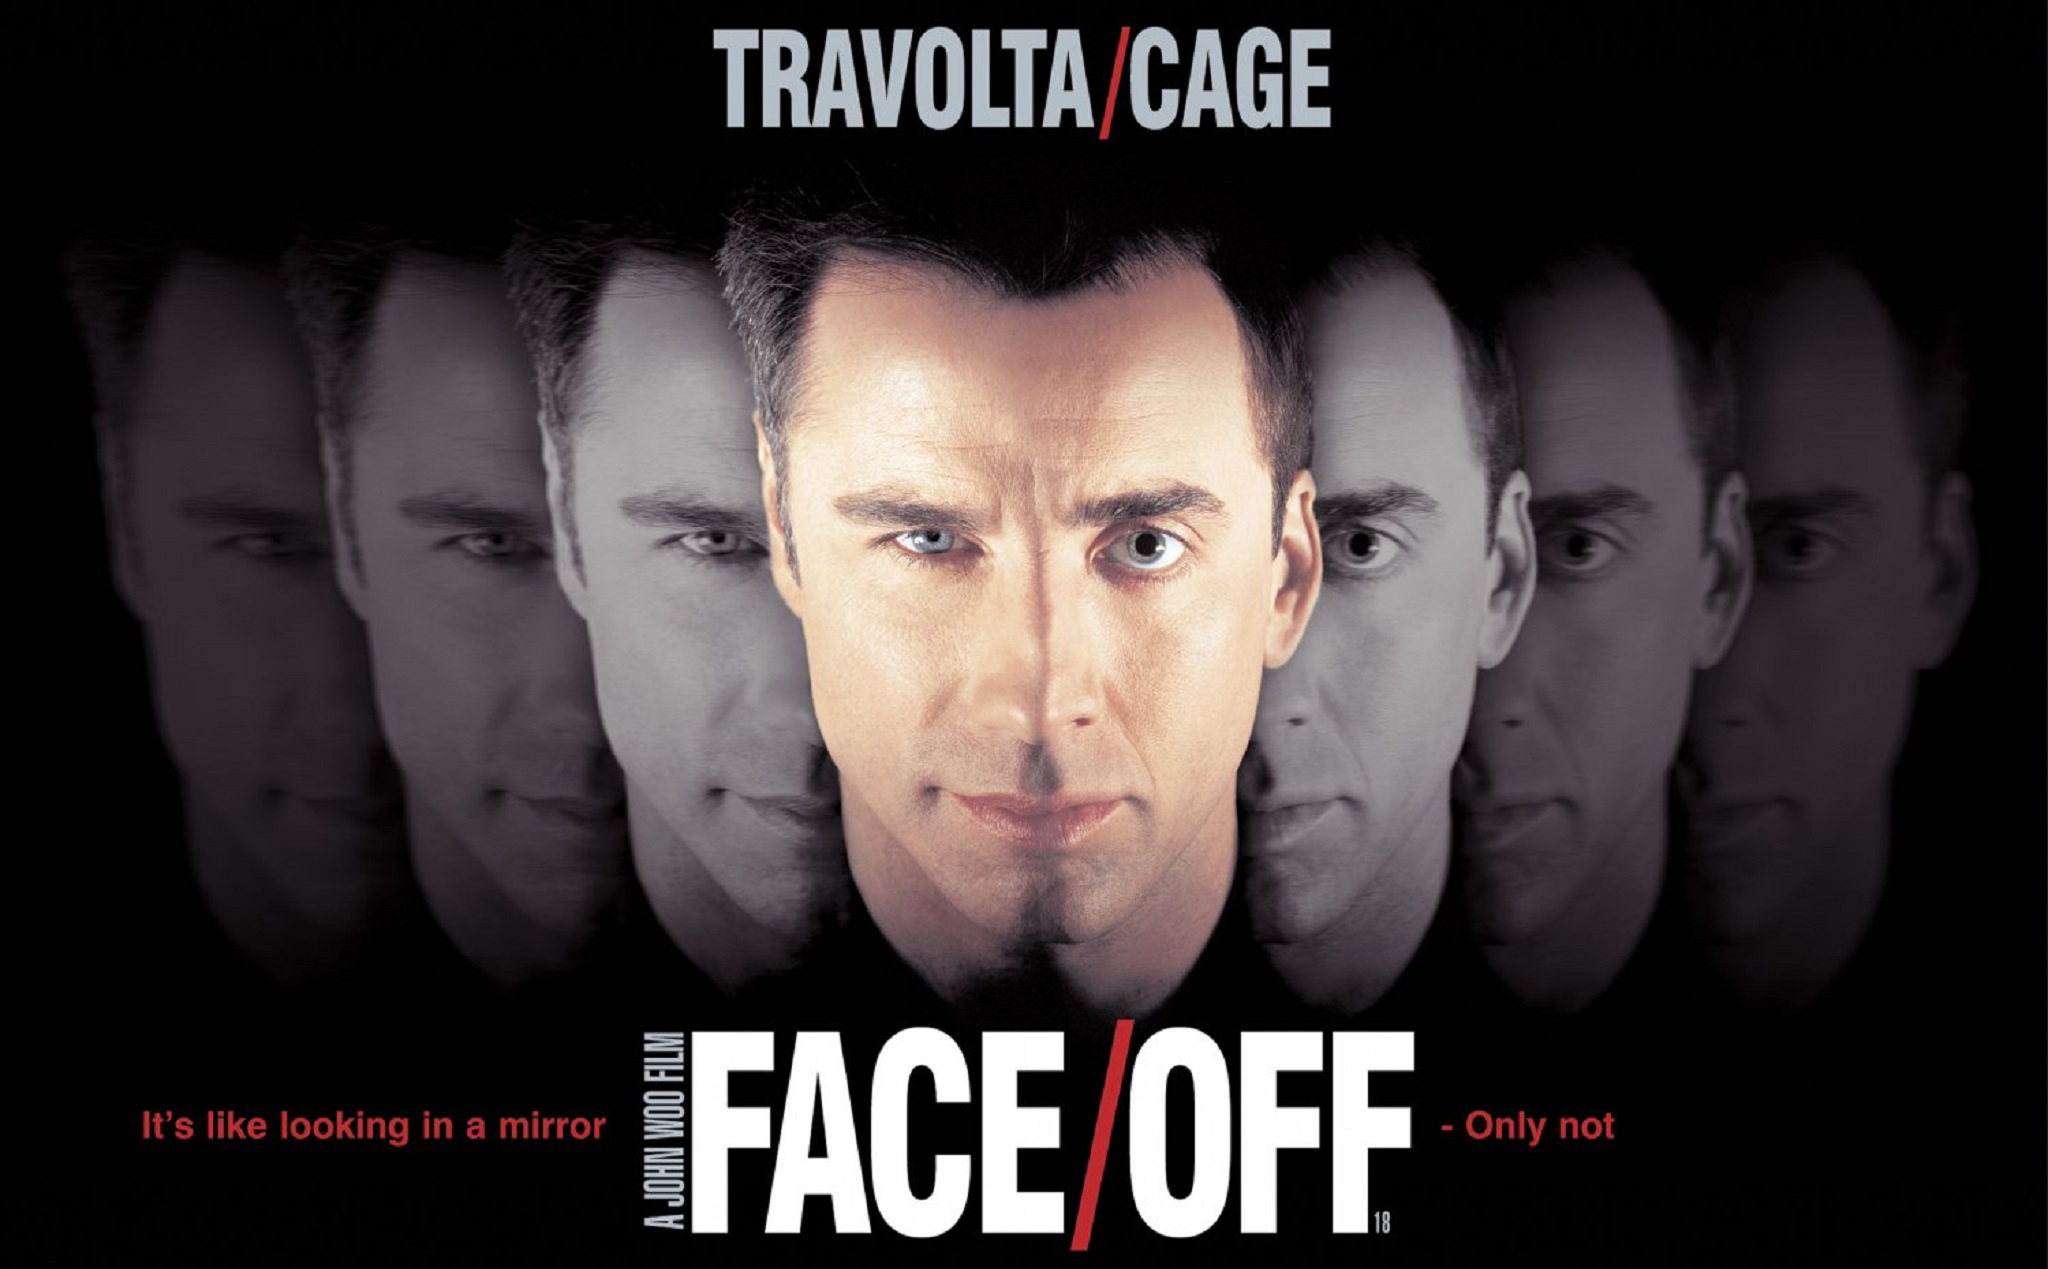 Face/Off / Face/Off (1997)